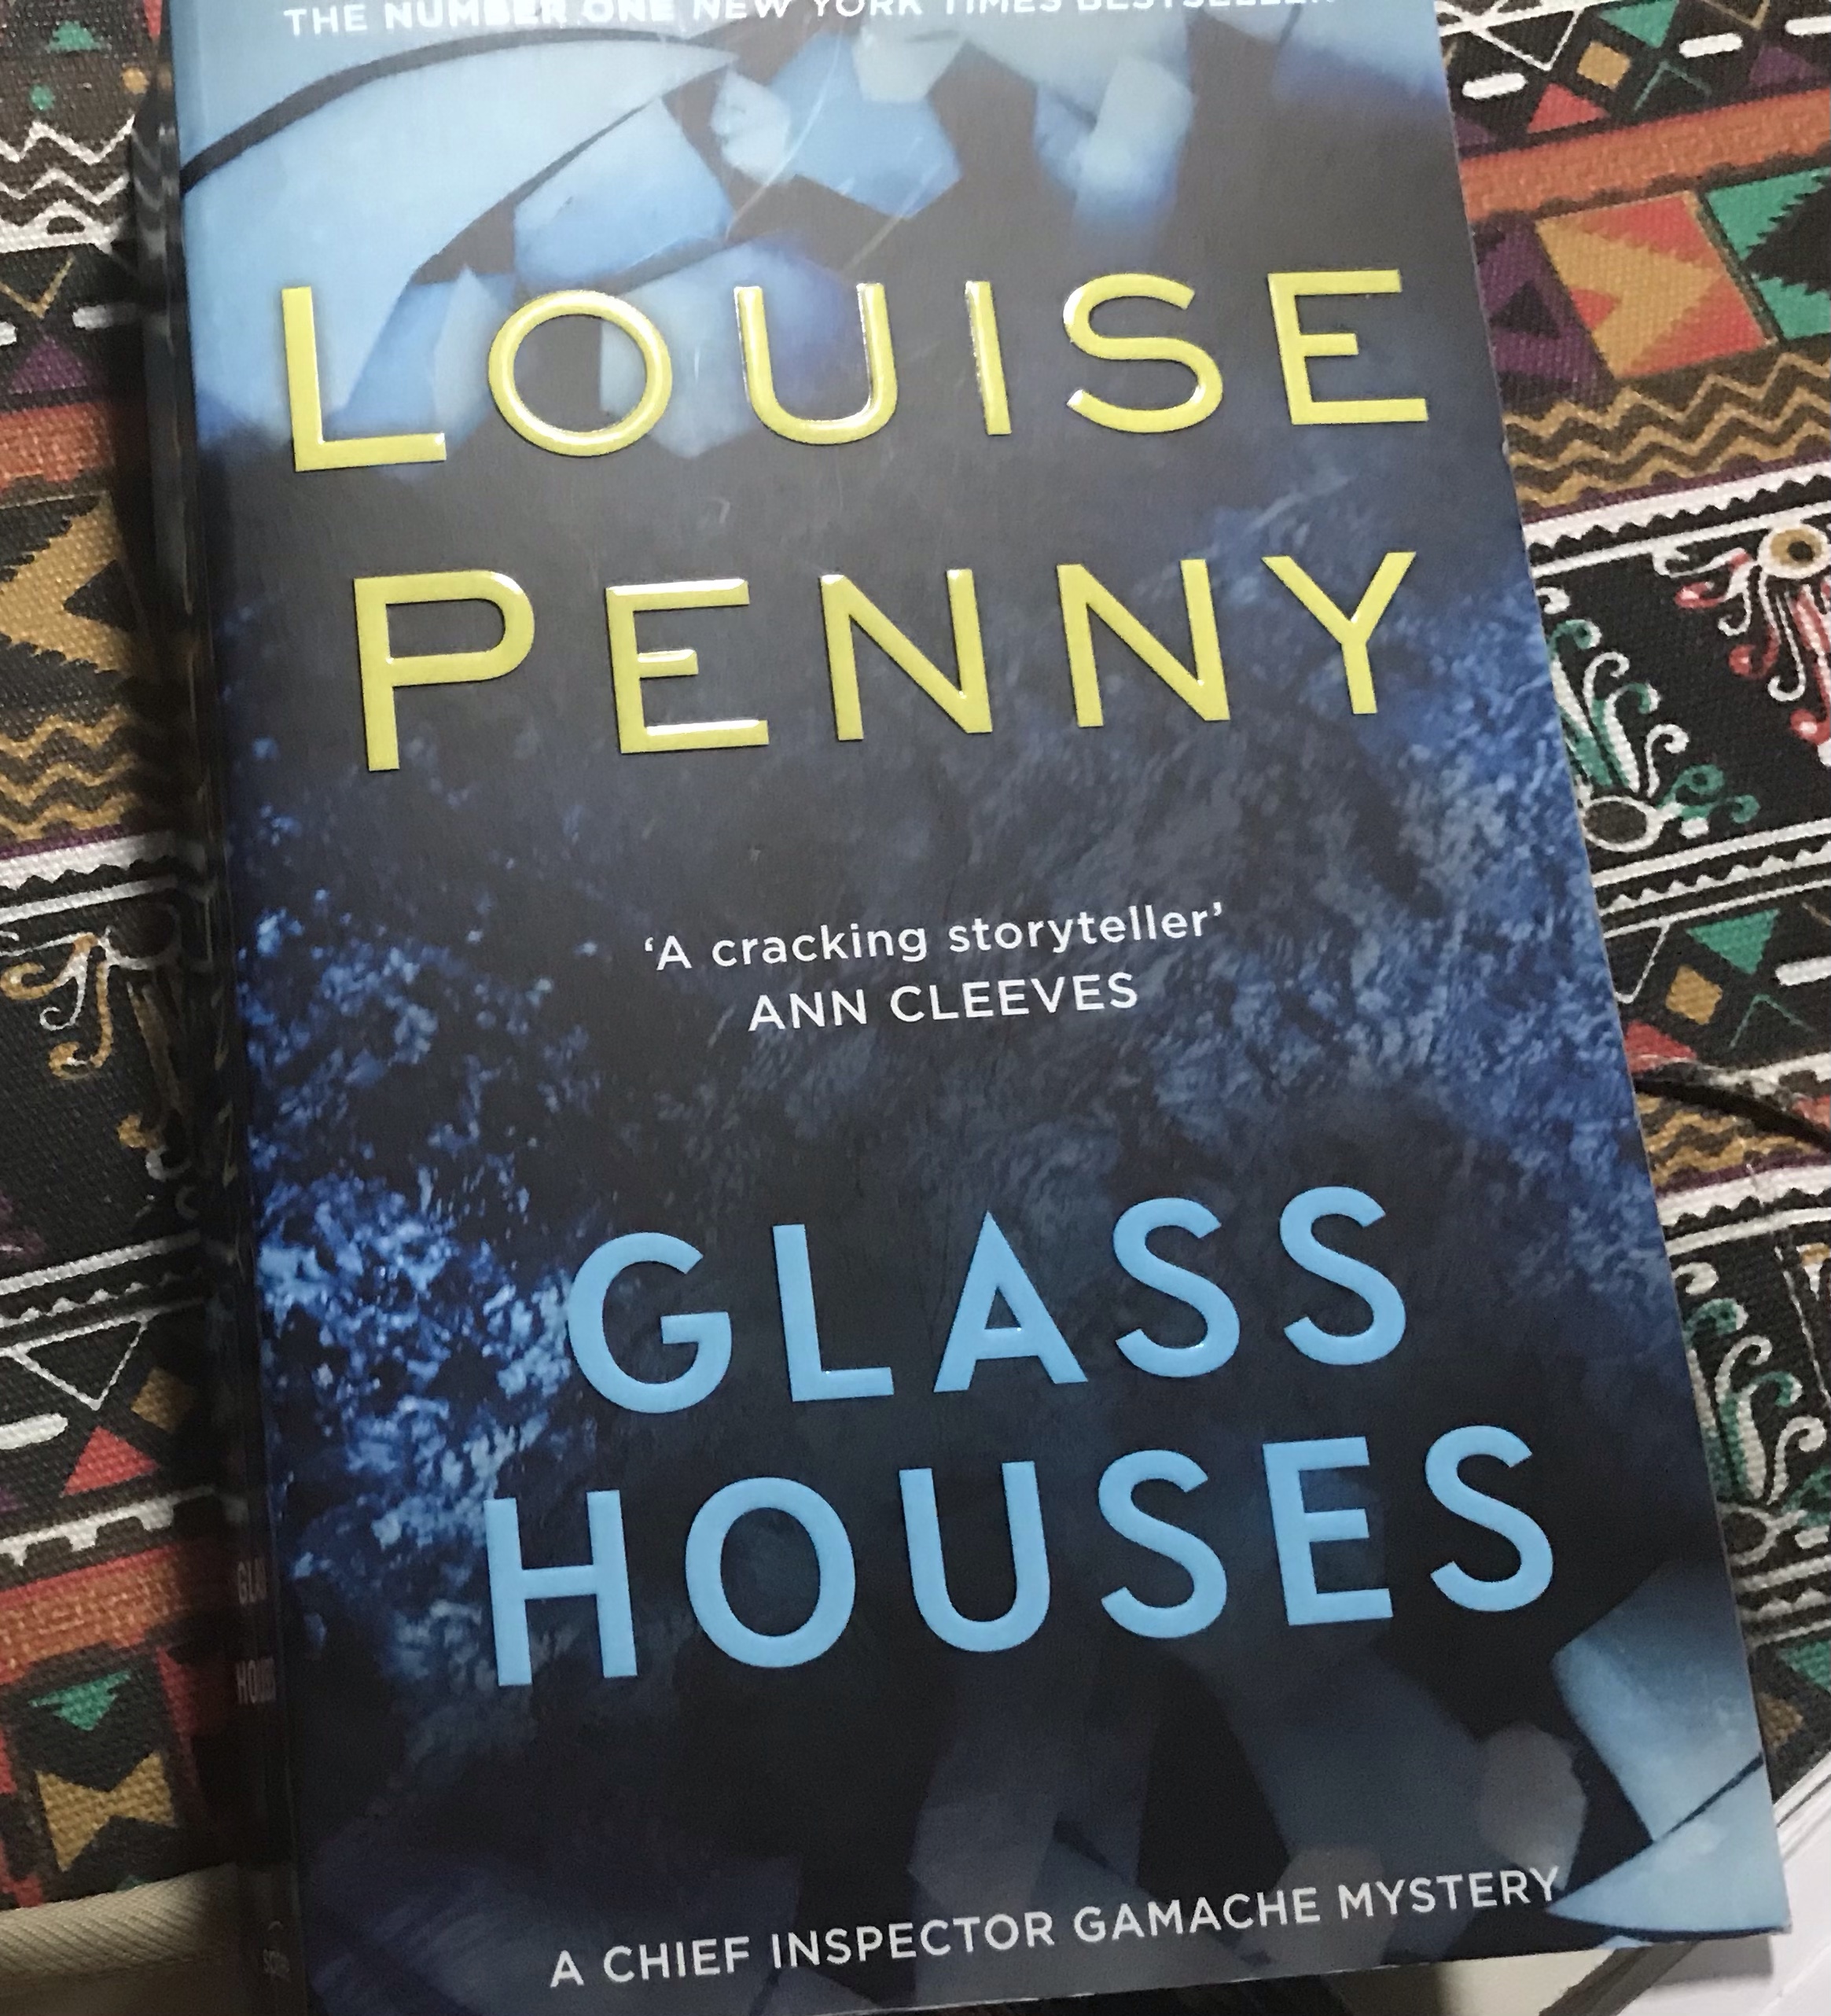 Glass Houses (No.13 Gamache Series) by Louise Penny